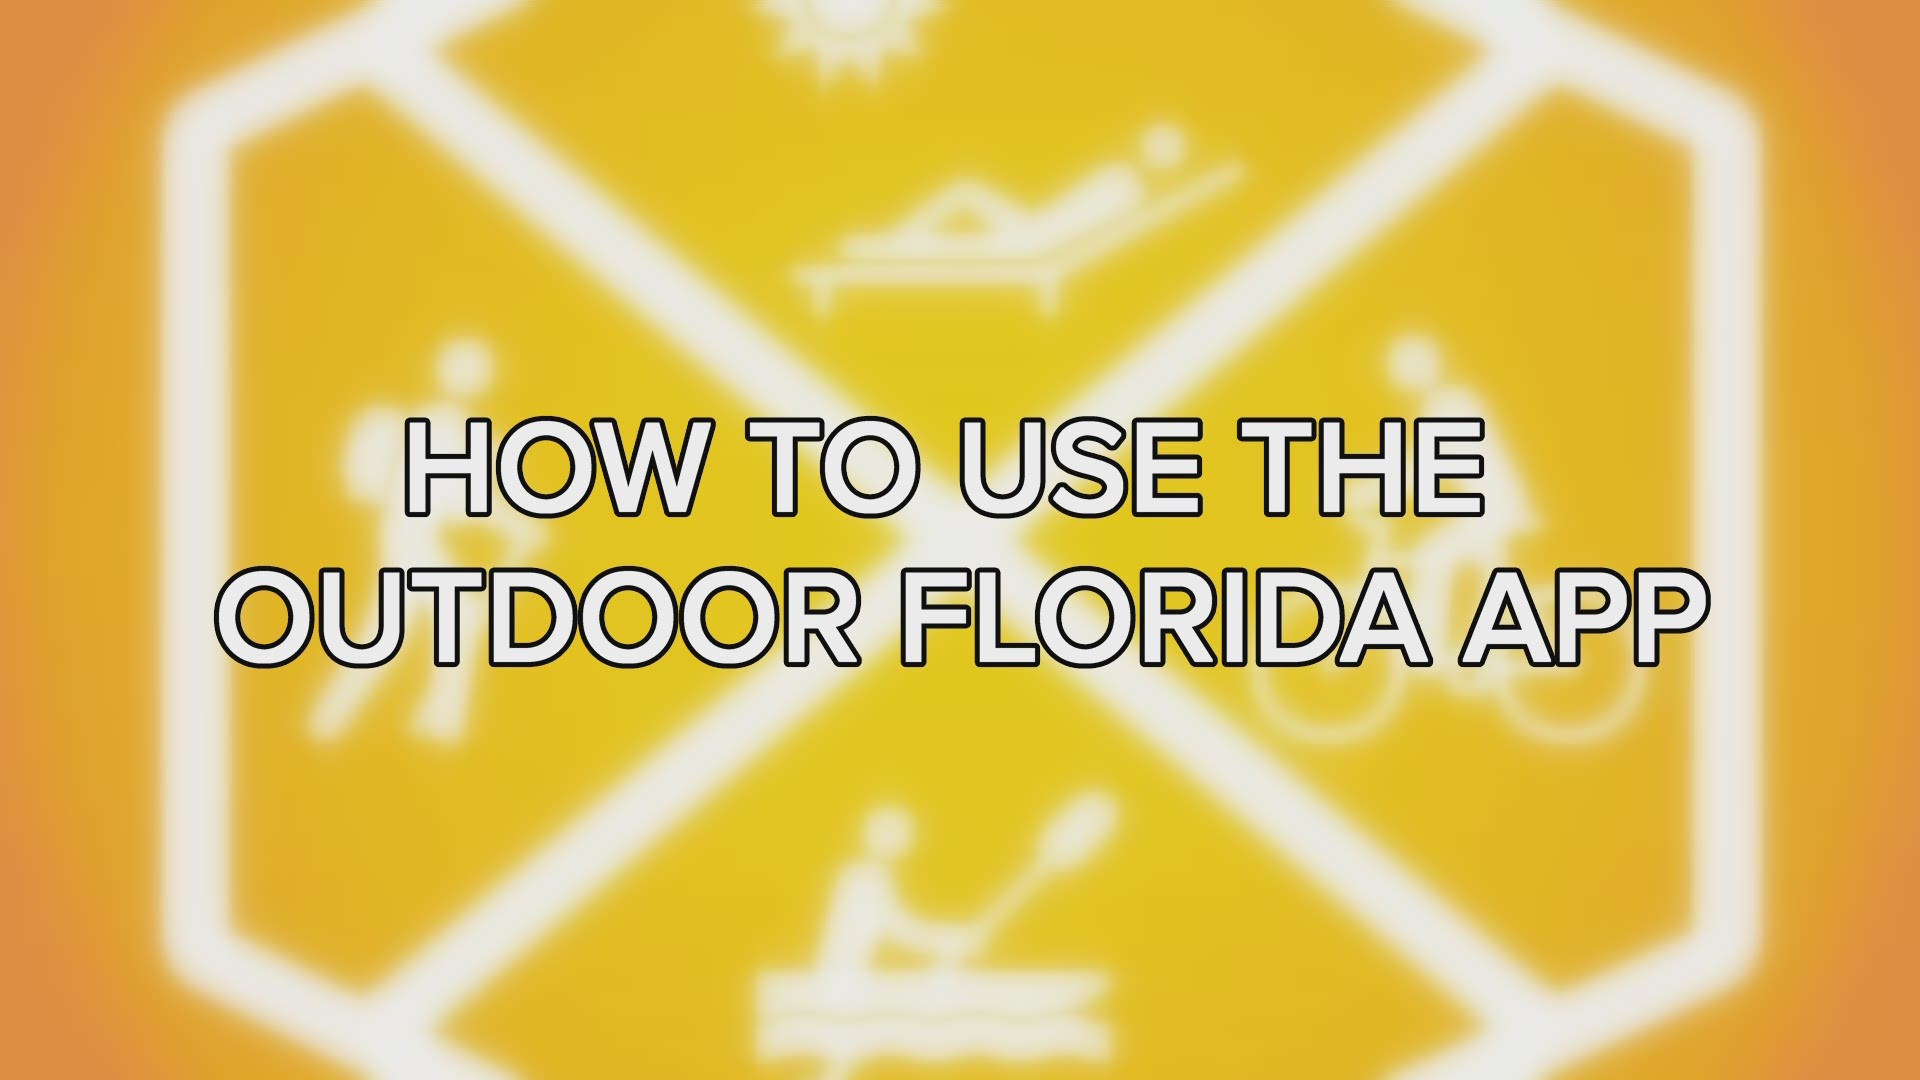 The Florida Department of Environmental Protection’s app ‘Outdoor Florida’ makes it easy to locate recreational activities near you.